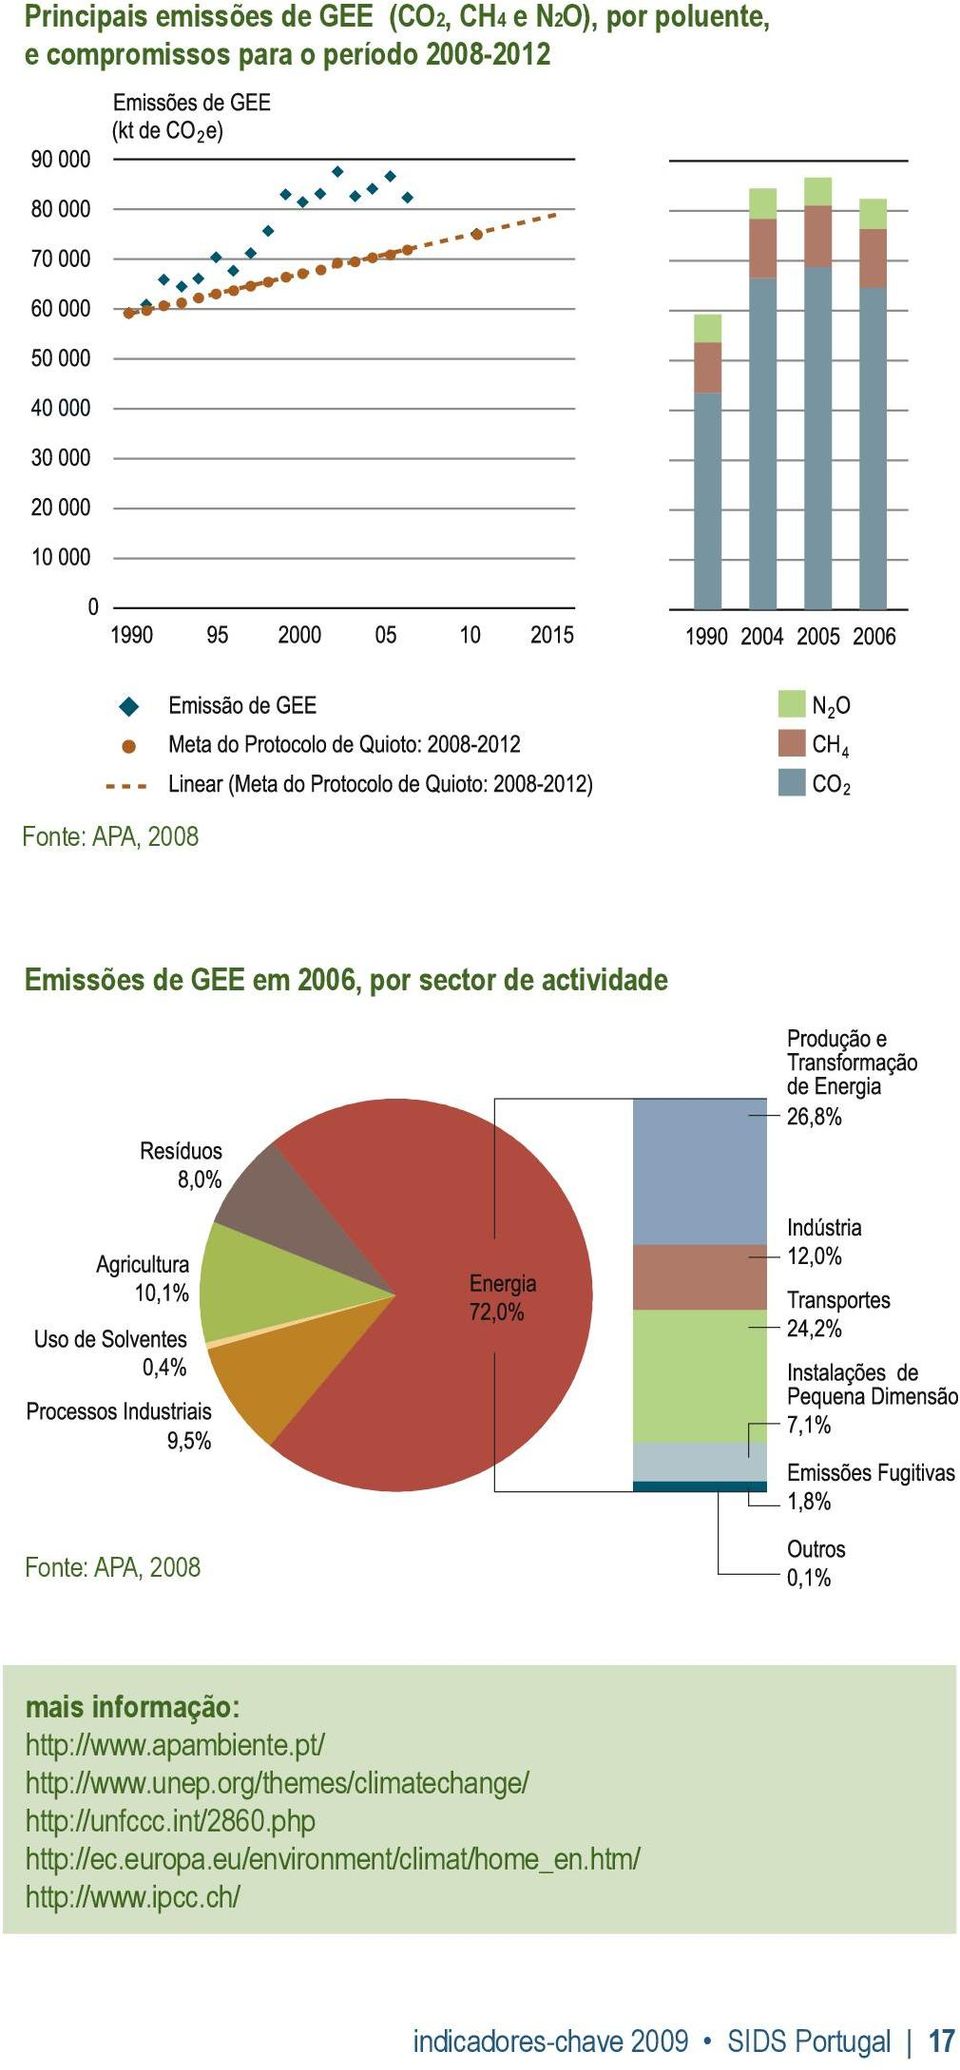 http://www.apambiente.pt/ http://www.unep.org/themes/climatechange/ http://unfccc.int/2860.